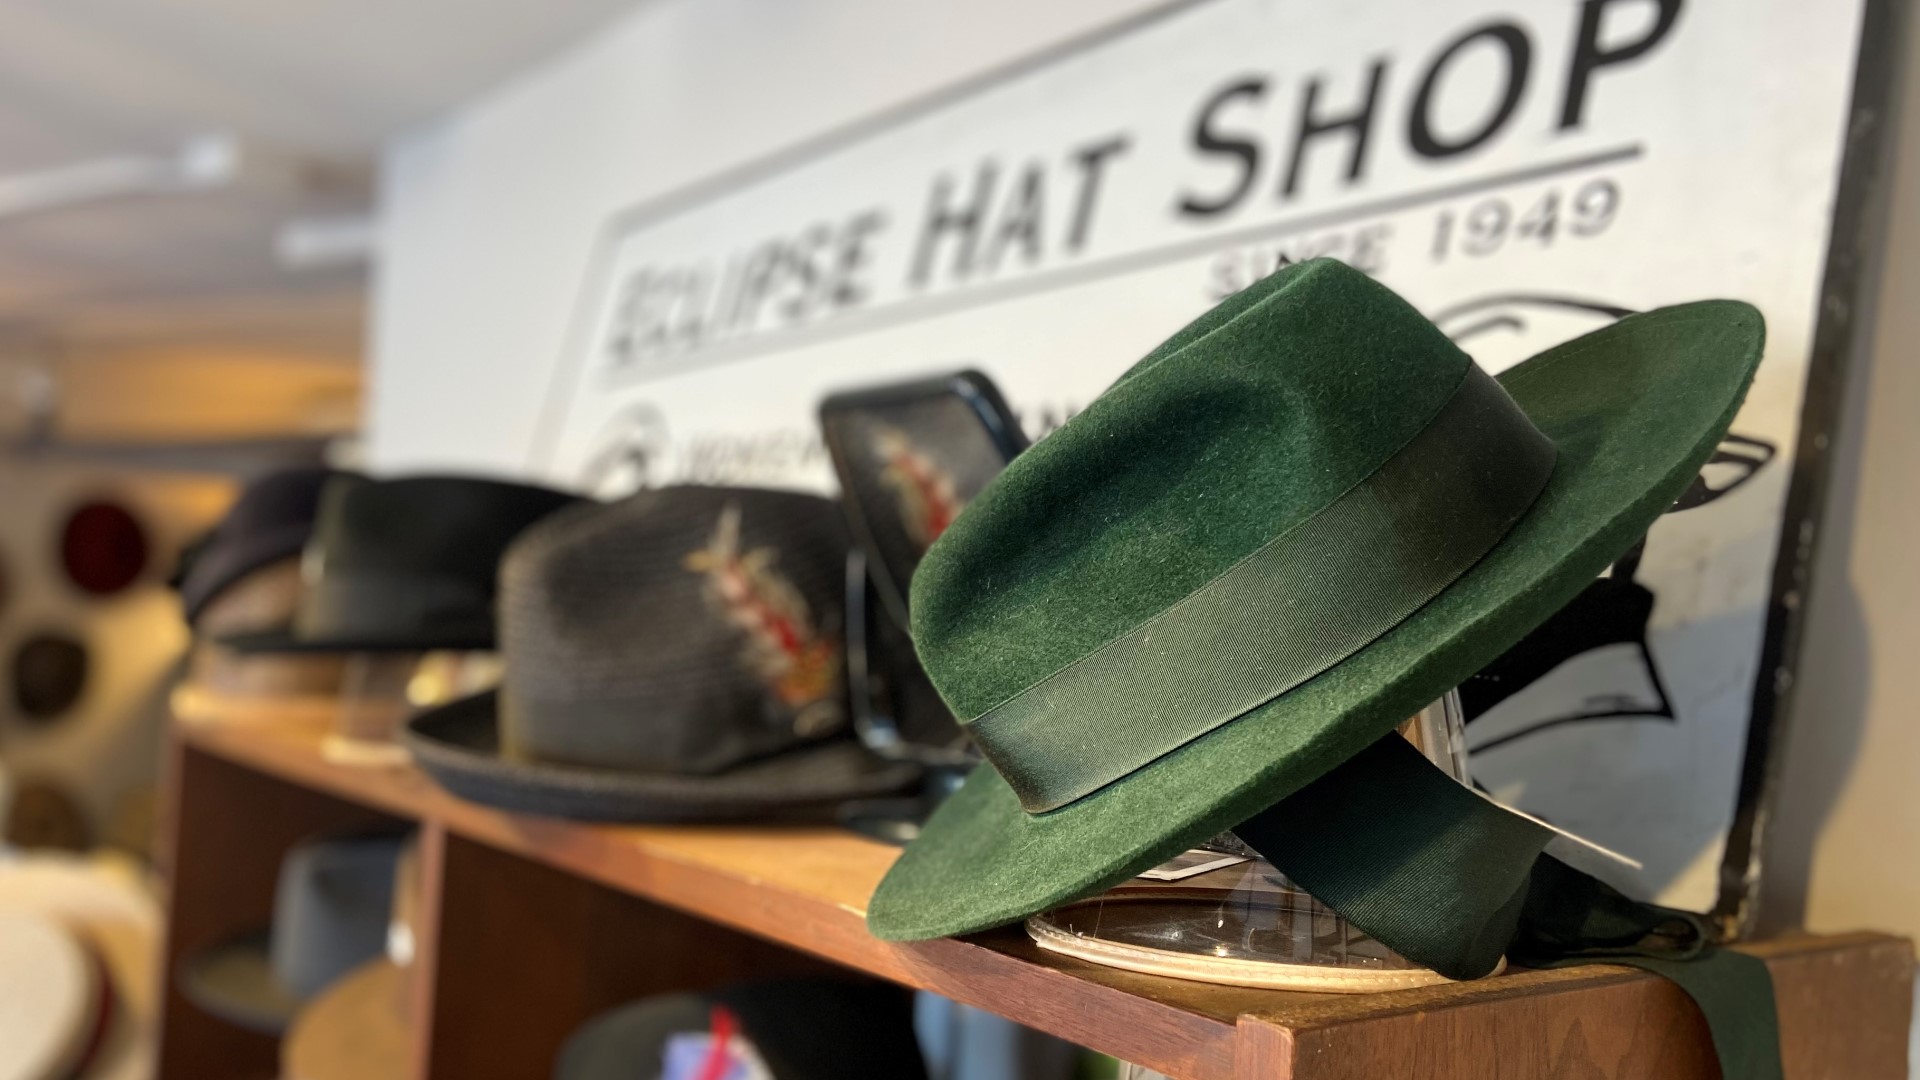 Eclipse Hat Shop was first founded in Pike Place Market 72 years ago! #k5evening